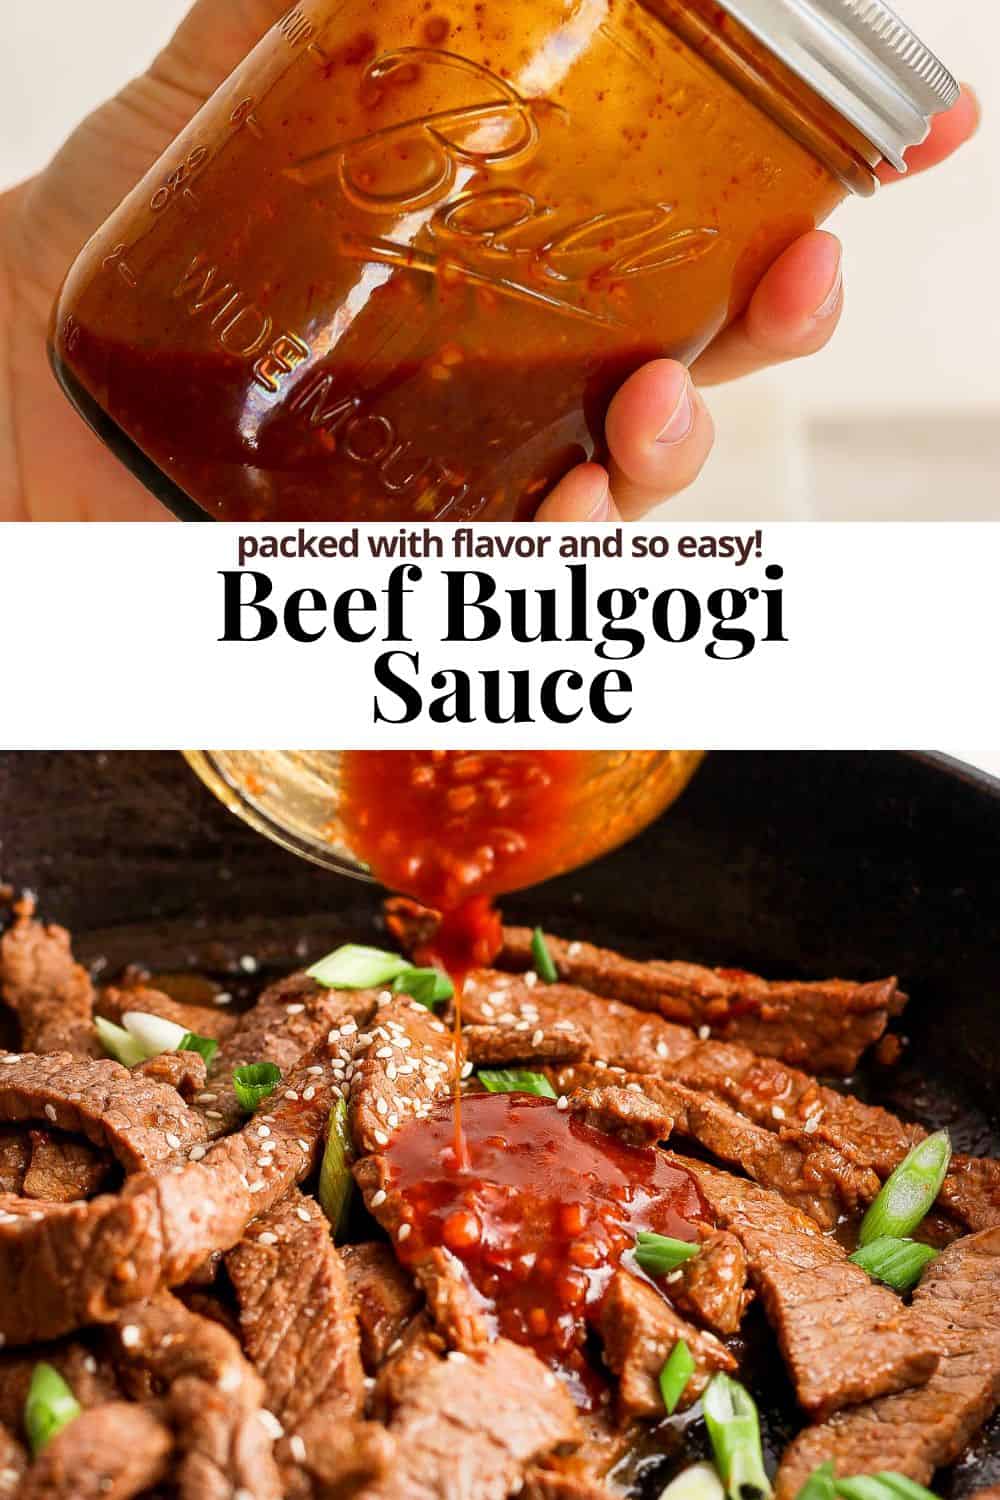 Pinterest image showing bulgogi sauce and the title, "beef bulgogi sauce packed with flavor and so easy".